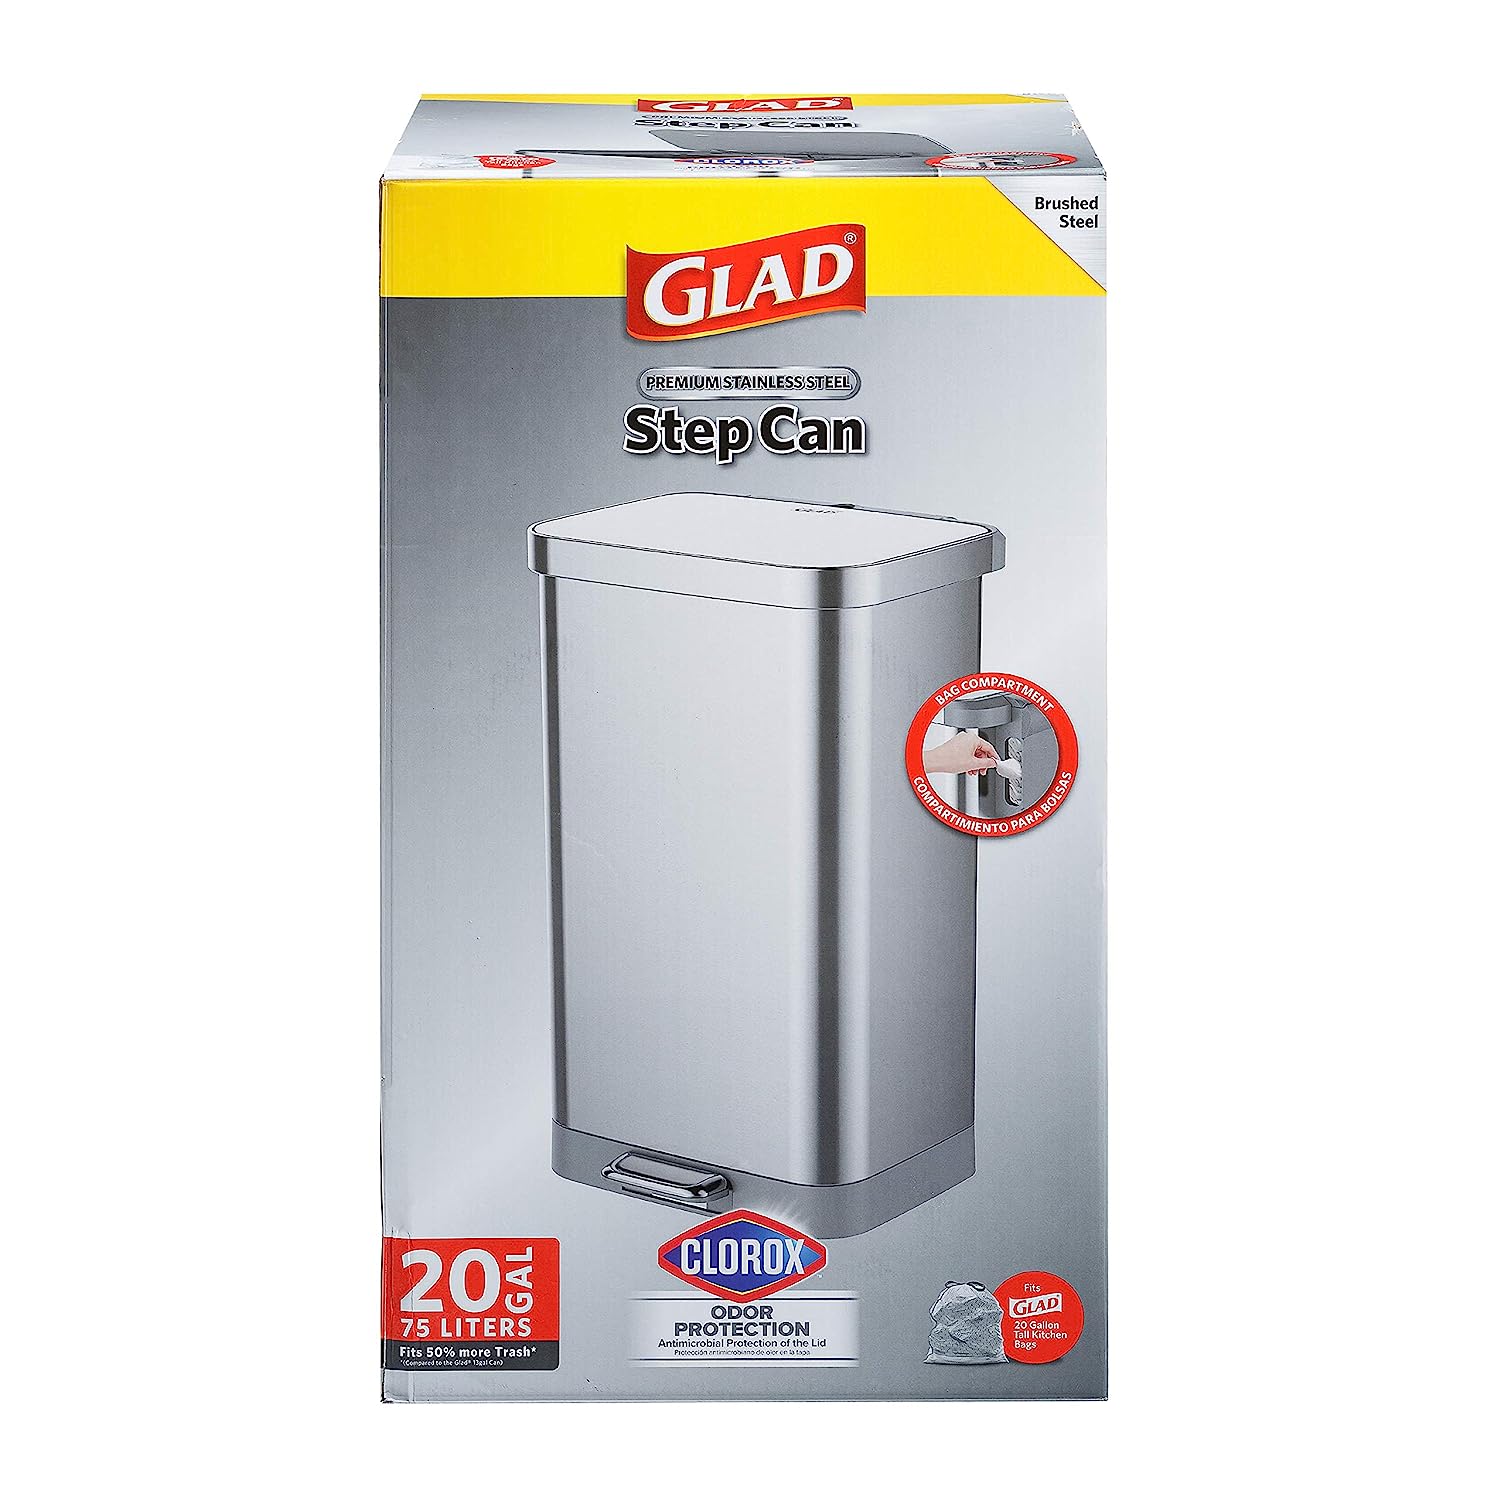 https://bigbigmart.com/wp-content/uploads/2023/07/Glad-Stainless-Steel-Step-Trash-Can-with-Clorox-Odor-Protection-Large-Metal-Kitchen-Garbage-Bin-with-Soft-Close-Lid-Foot-Pedal-and-Waste-Bag-Roll-Holder-20-Gallon-All-Stainless8.jpg